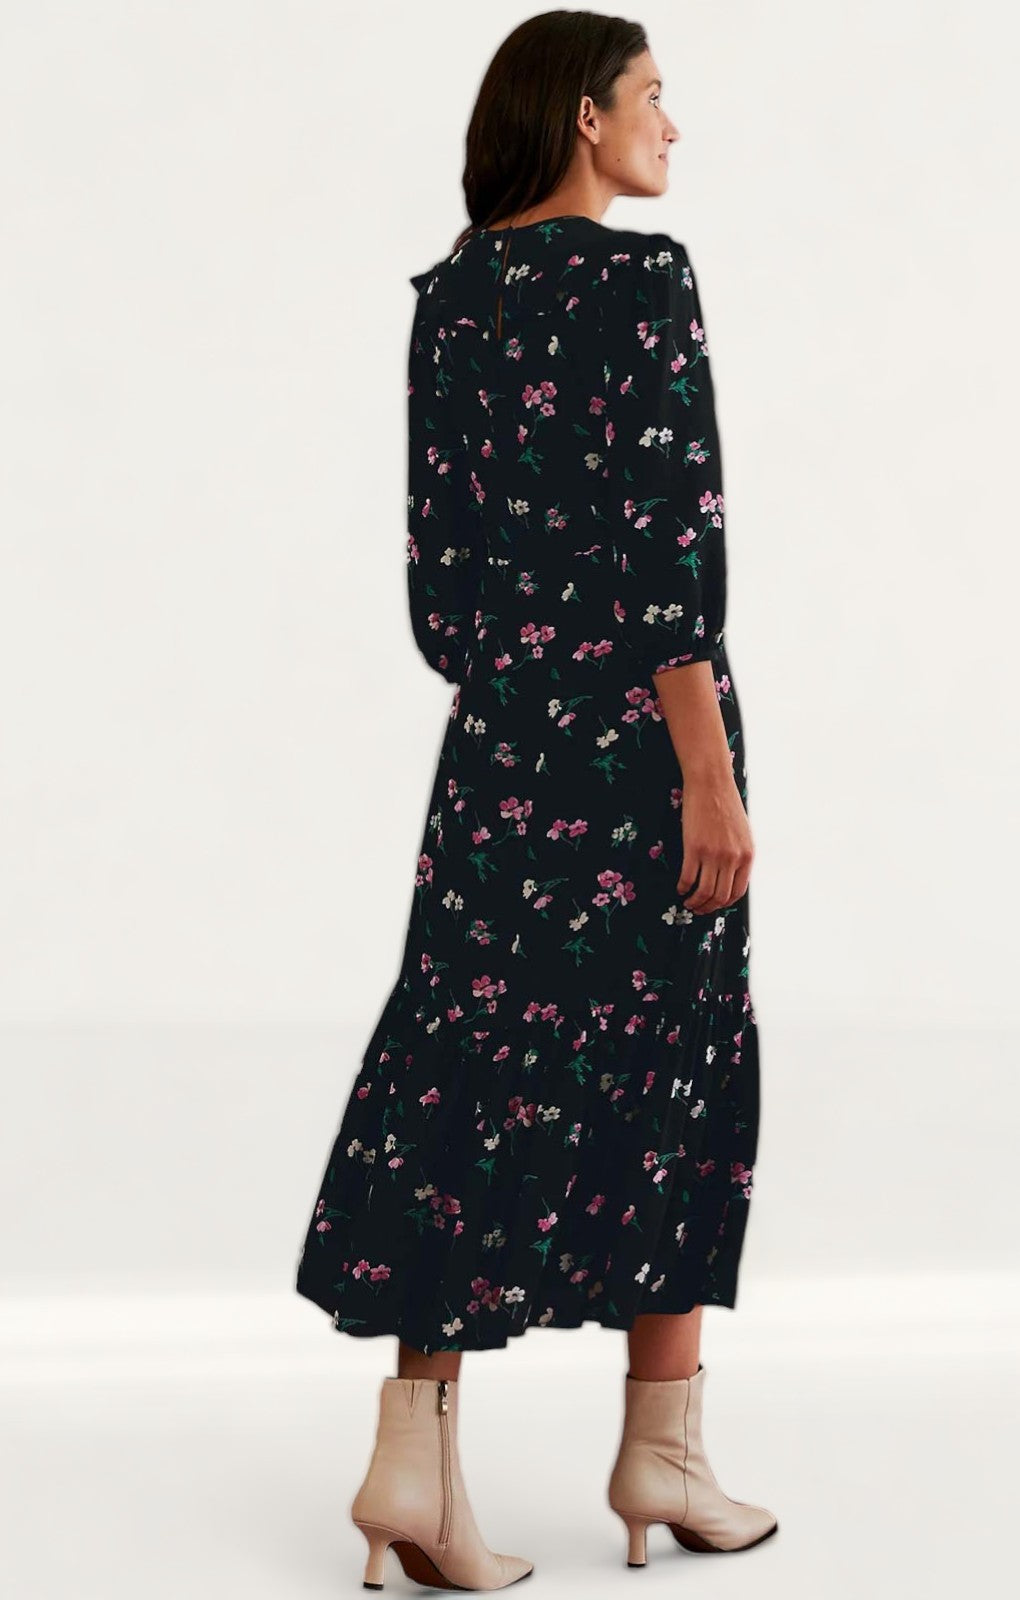 M&S X Ghost Floral Frill Detail Midi Tea Dress product image